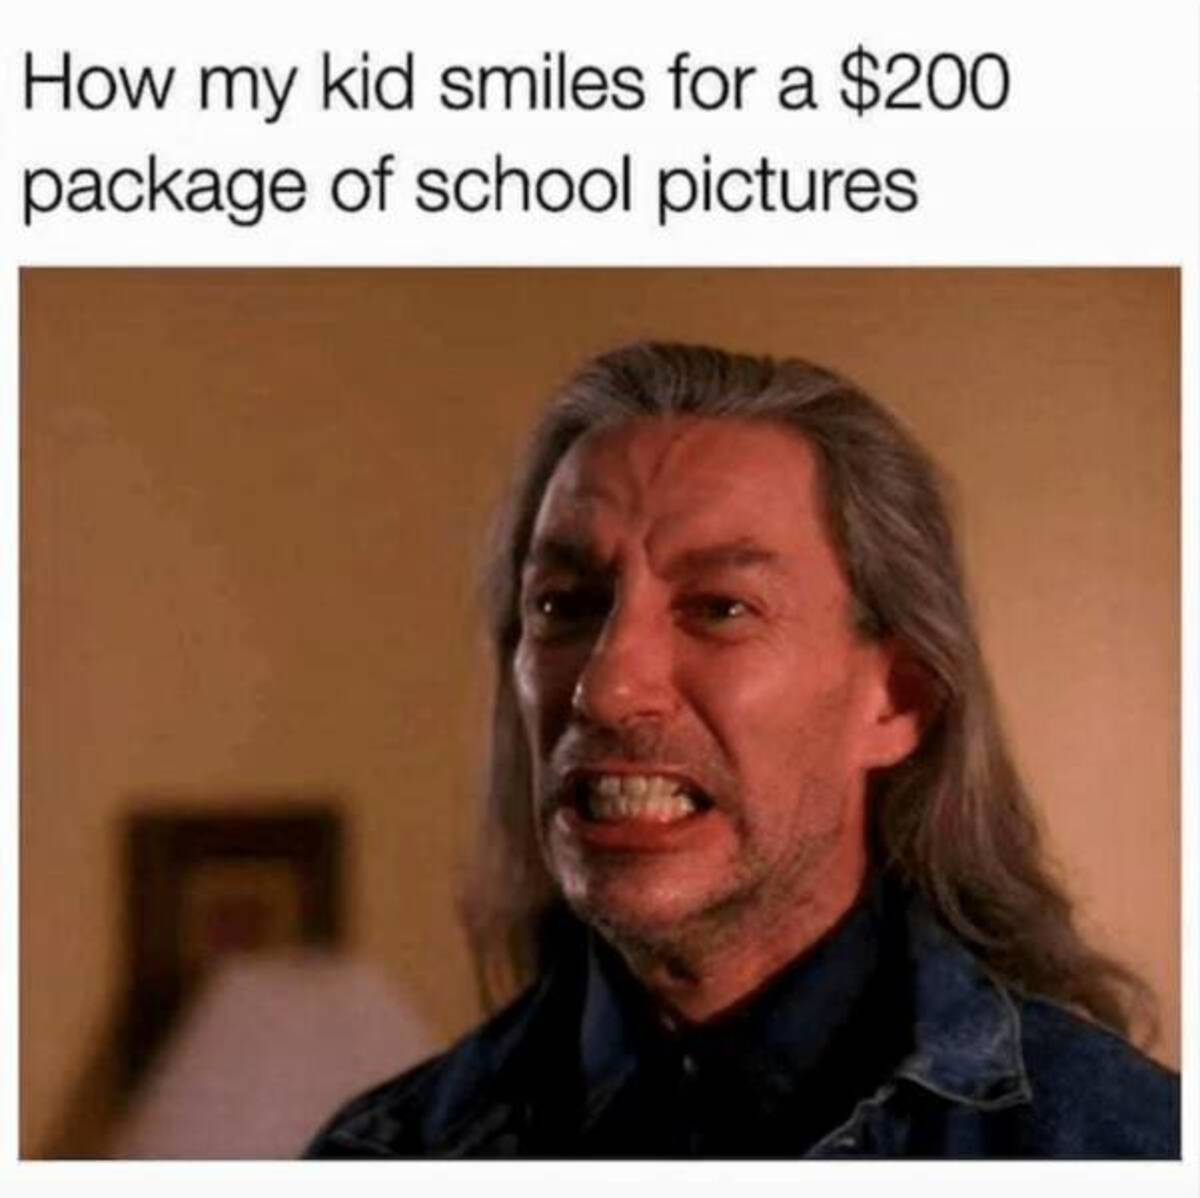 my kid smiles for school - How my kid smiles for a $200 package of school pictures